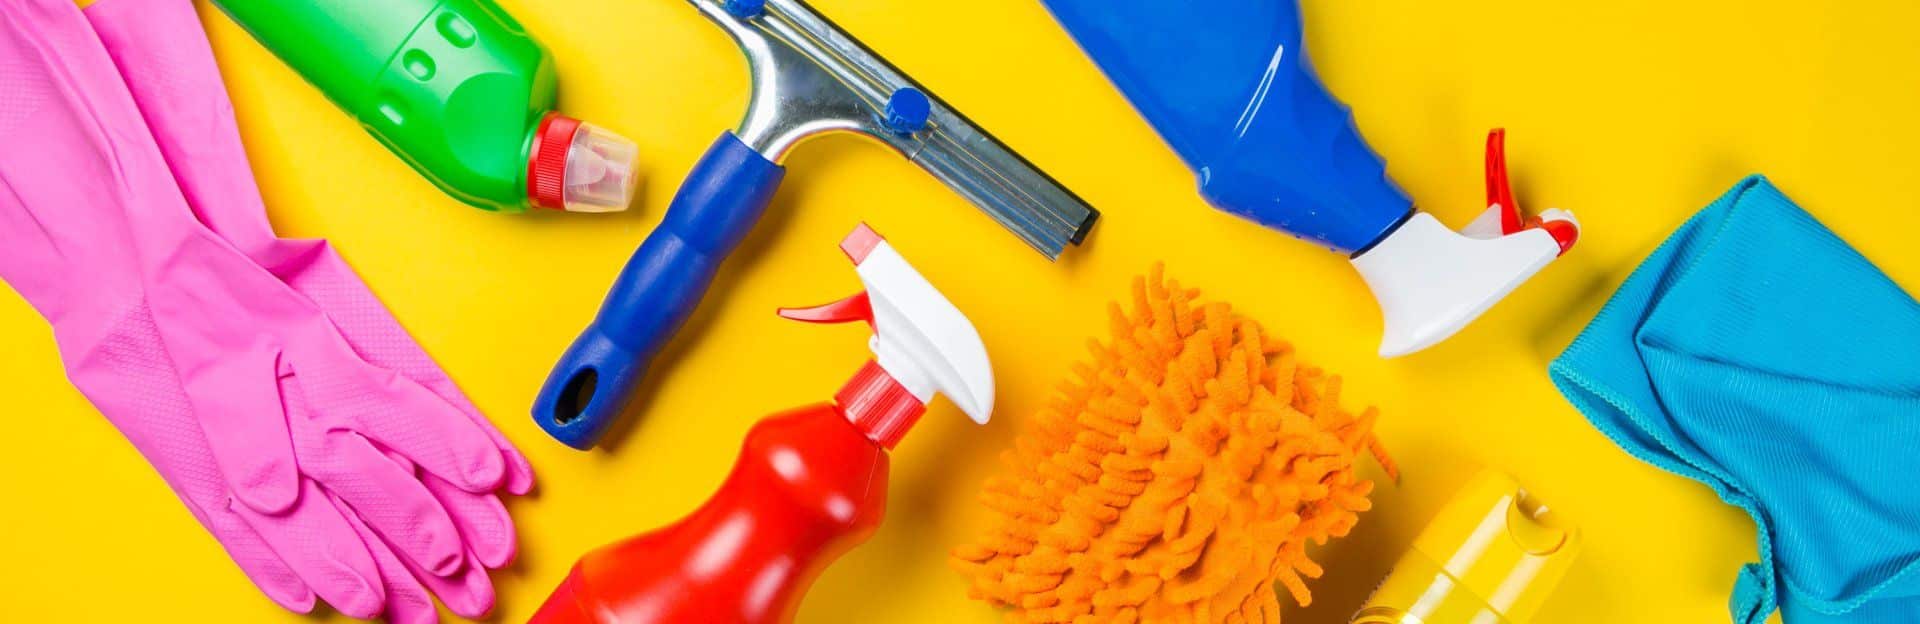 Various cleaning supplies on a yellow background